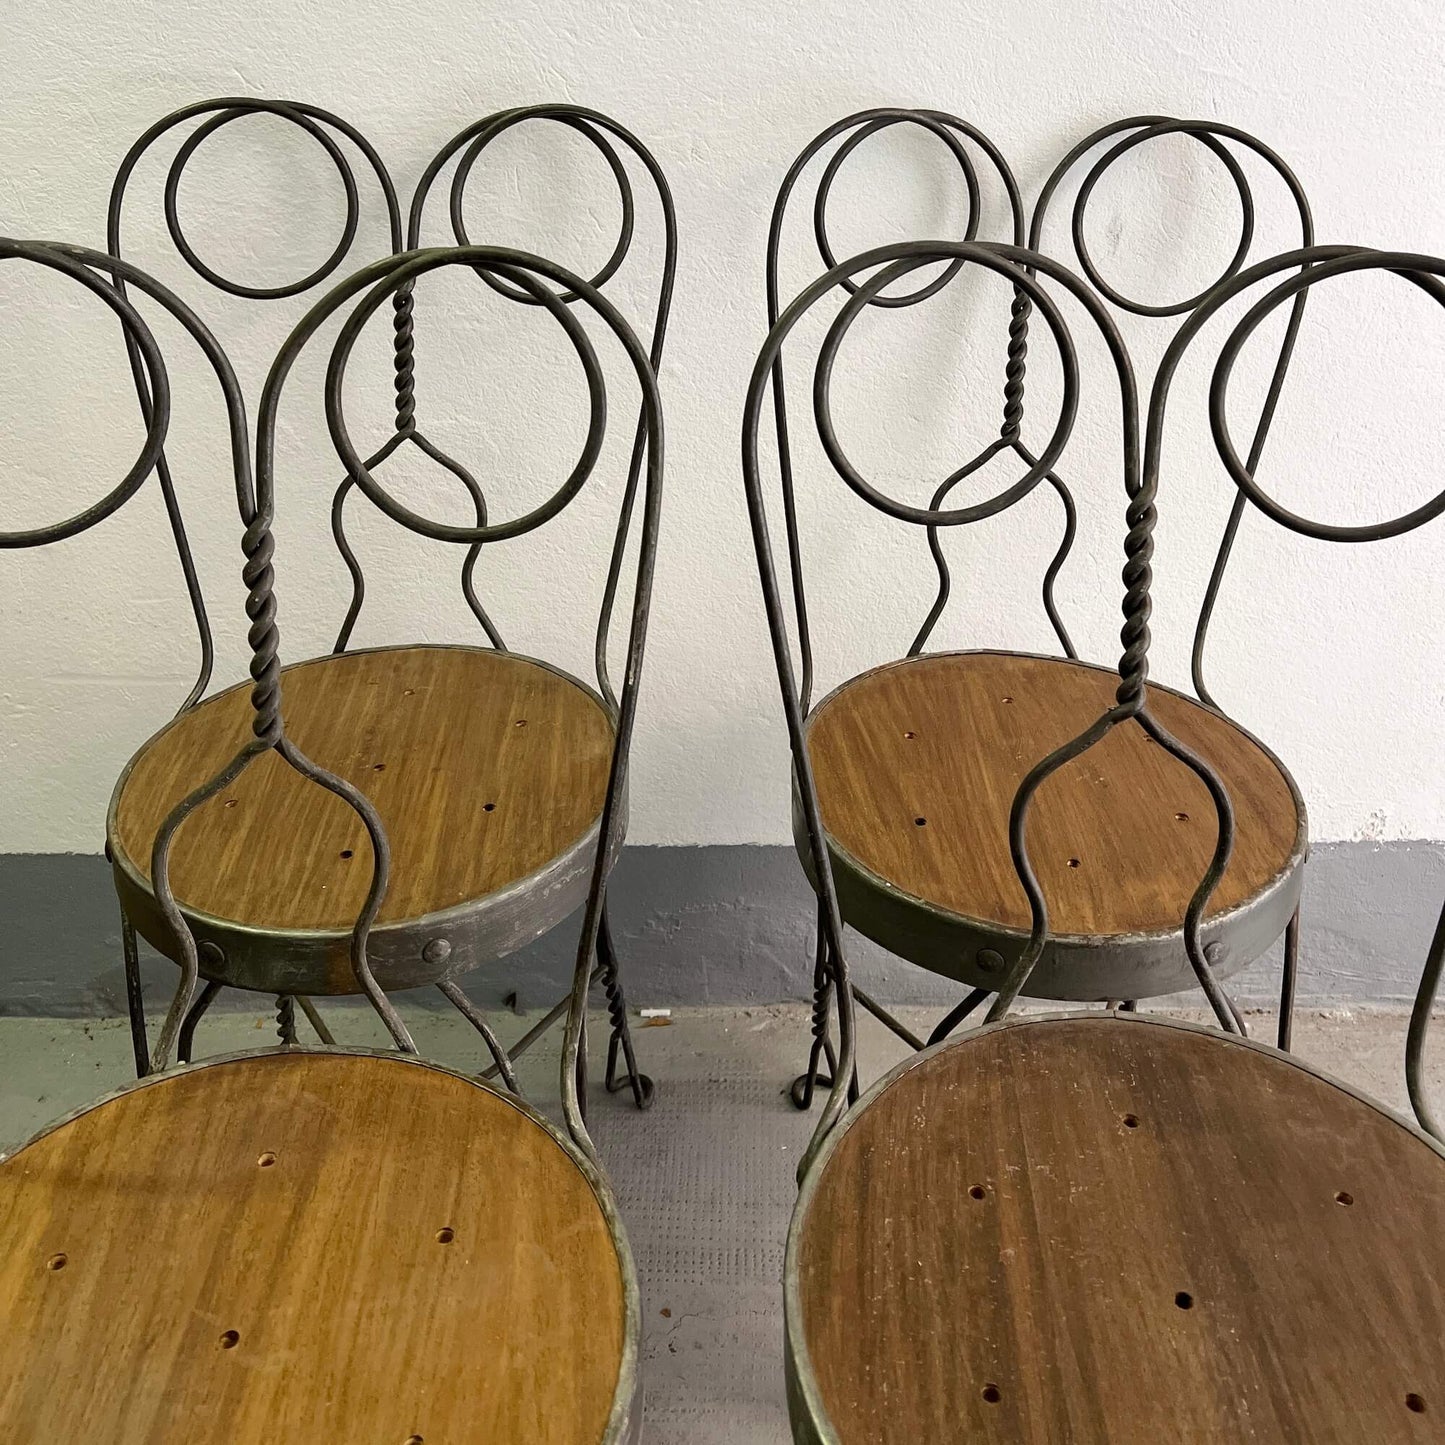 Set of 4 Chairs - wood and iron - Vintage